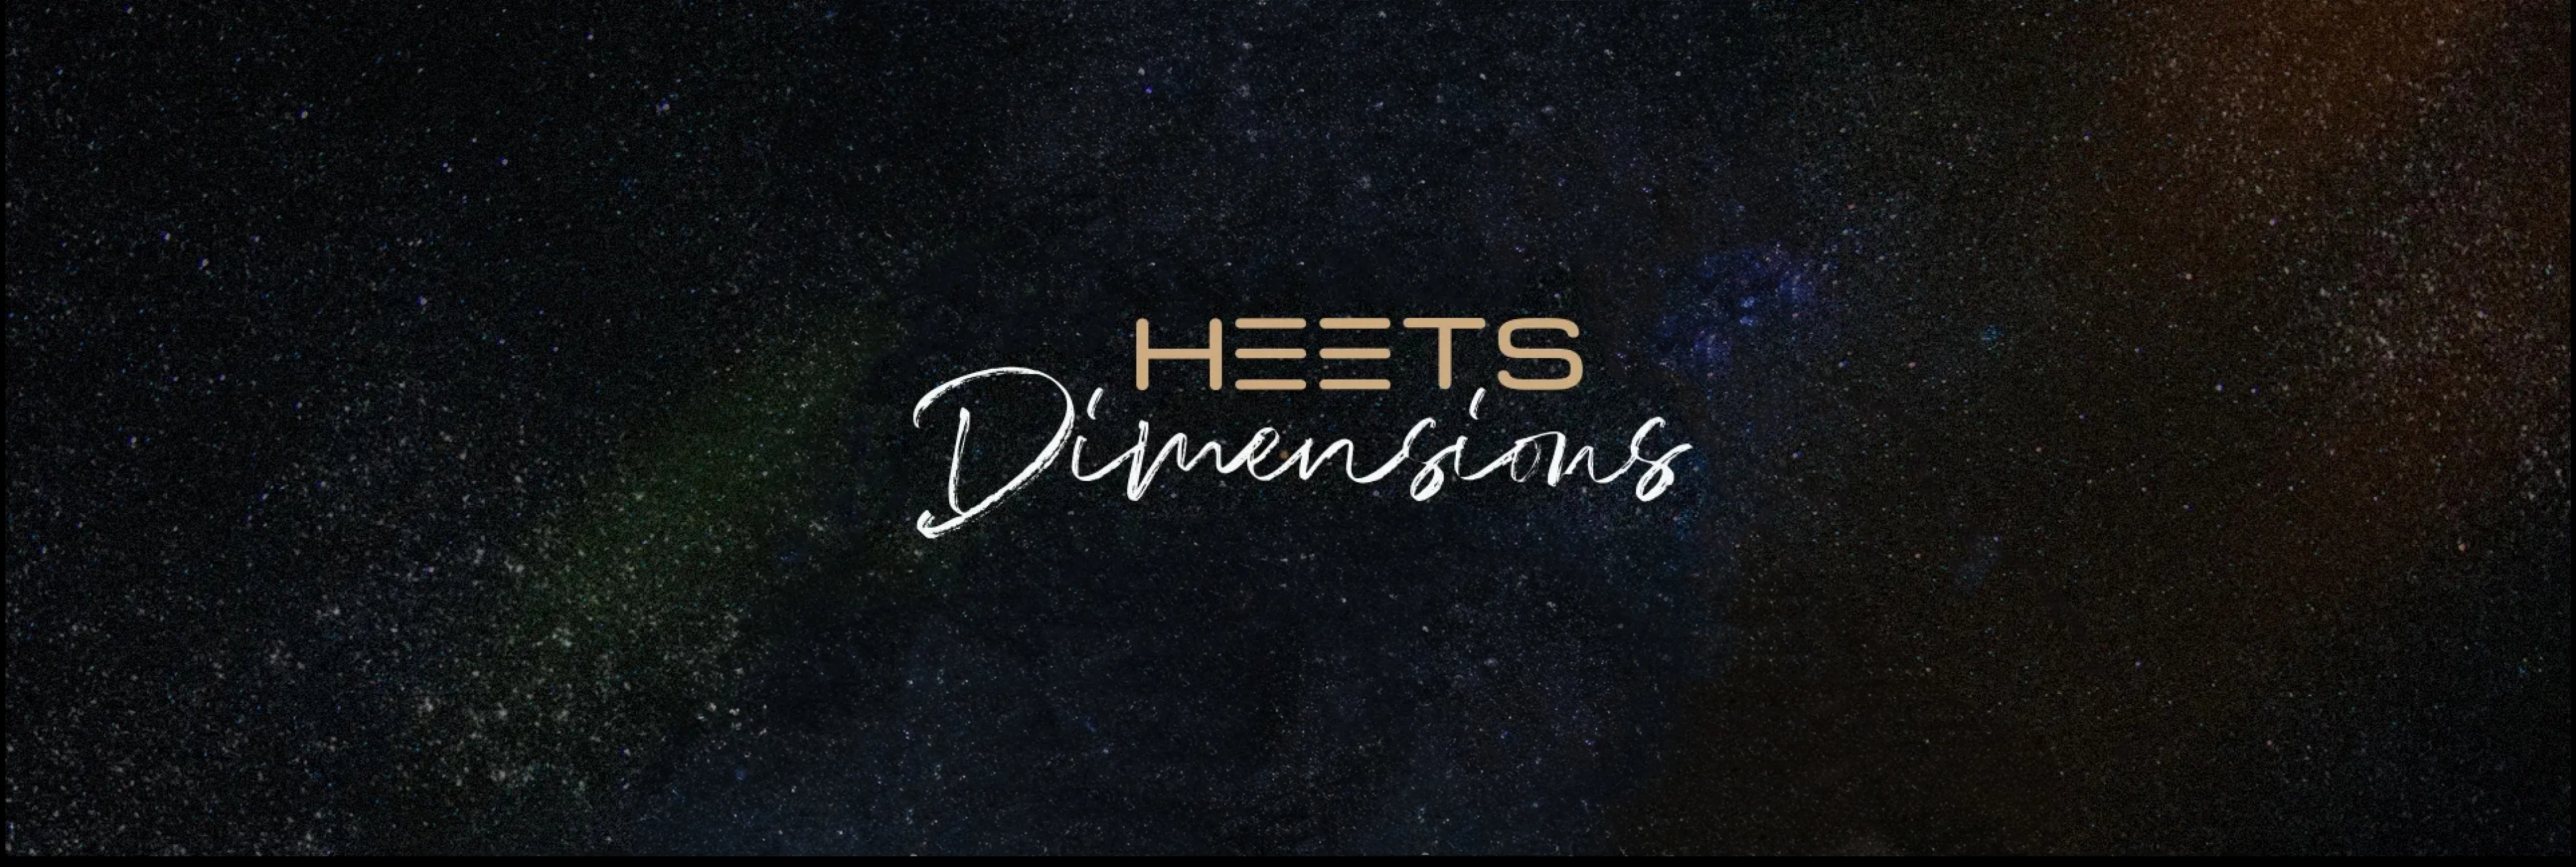 new-heets-dimensions